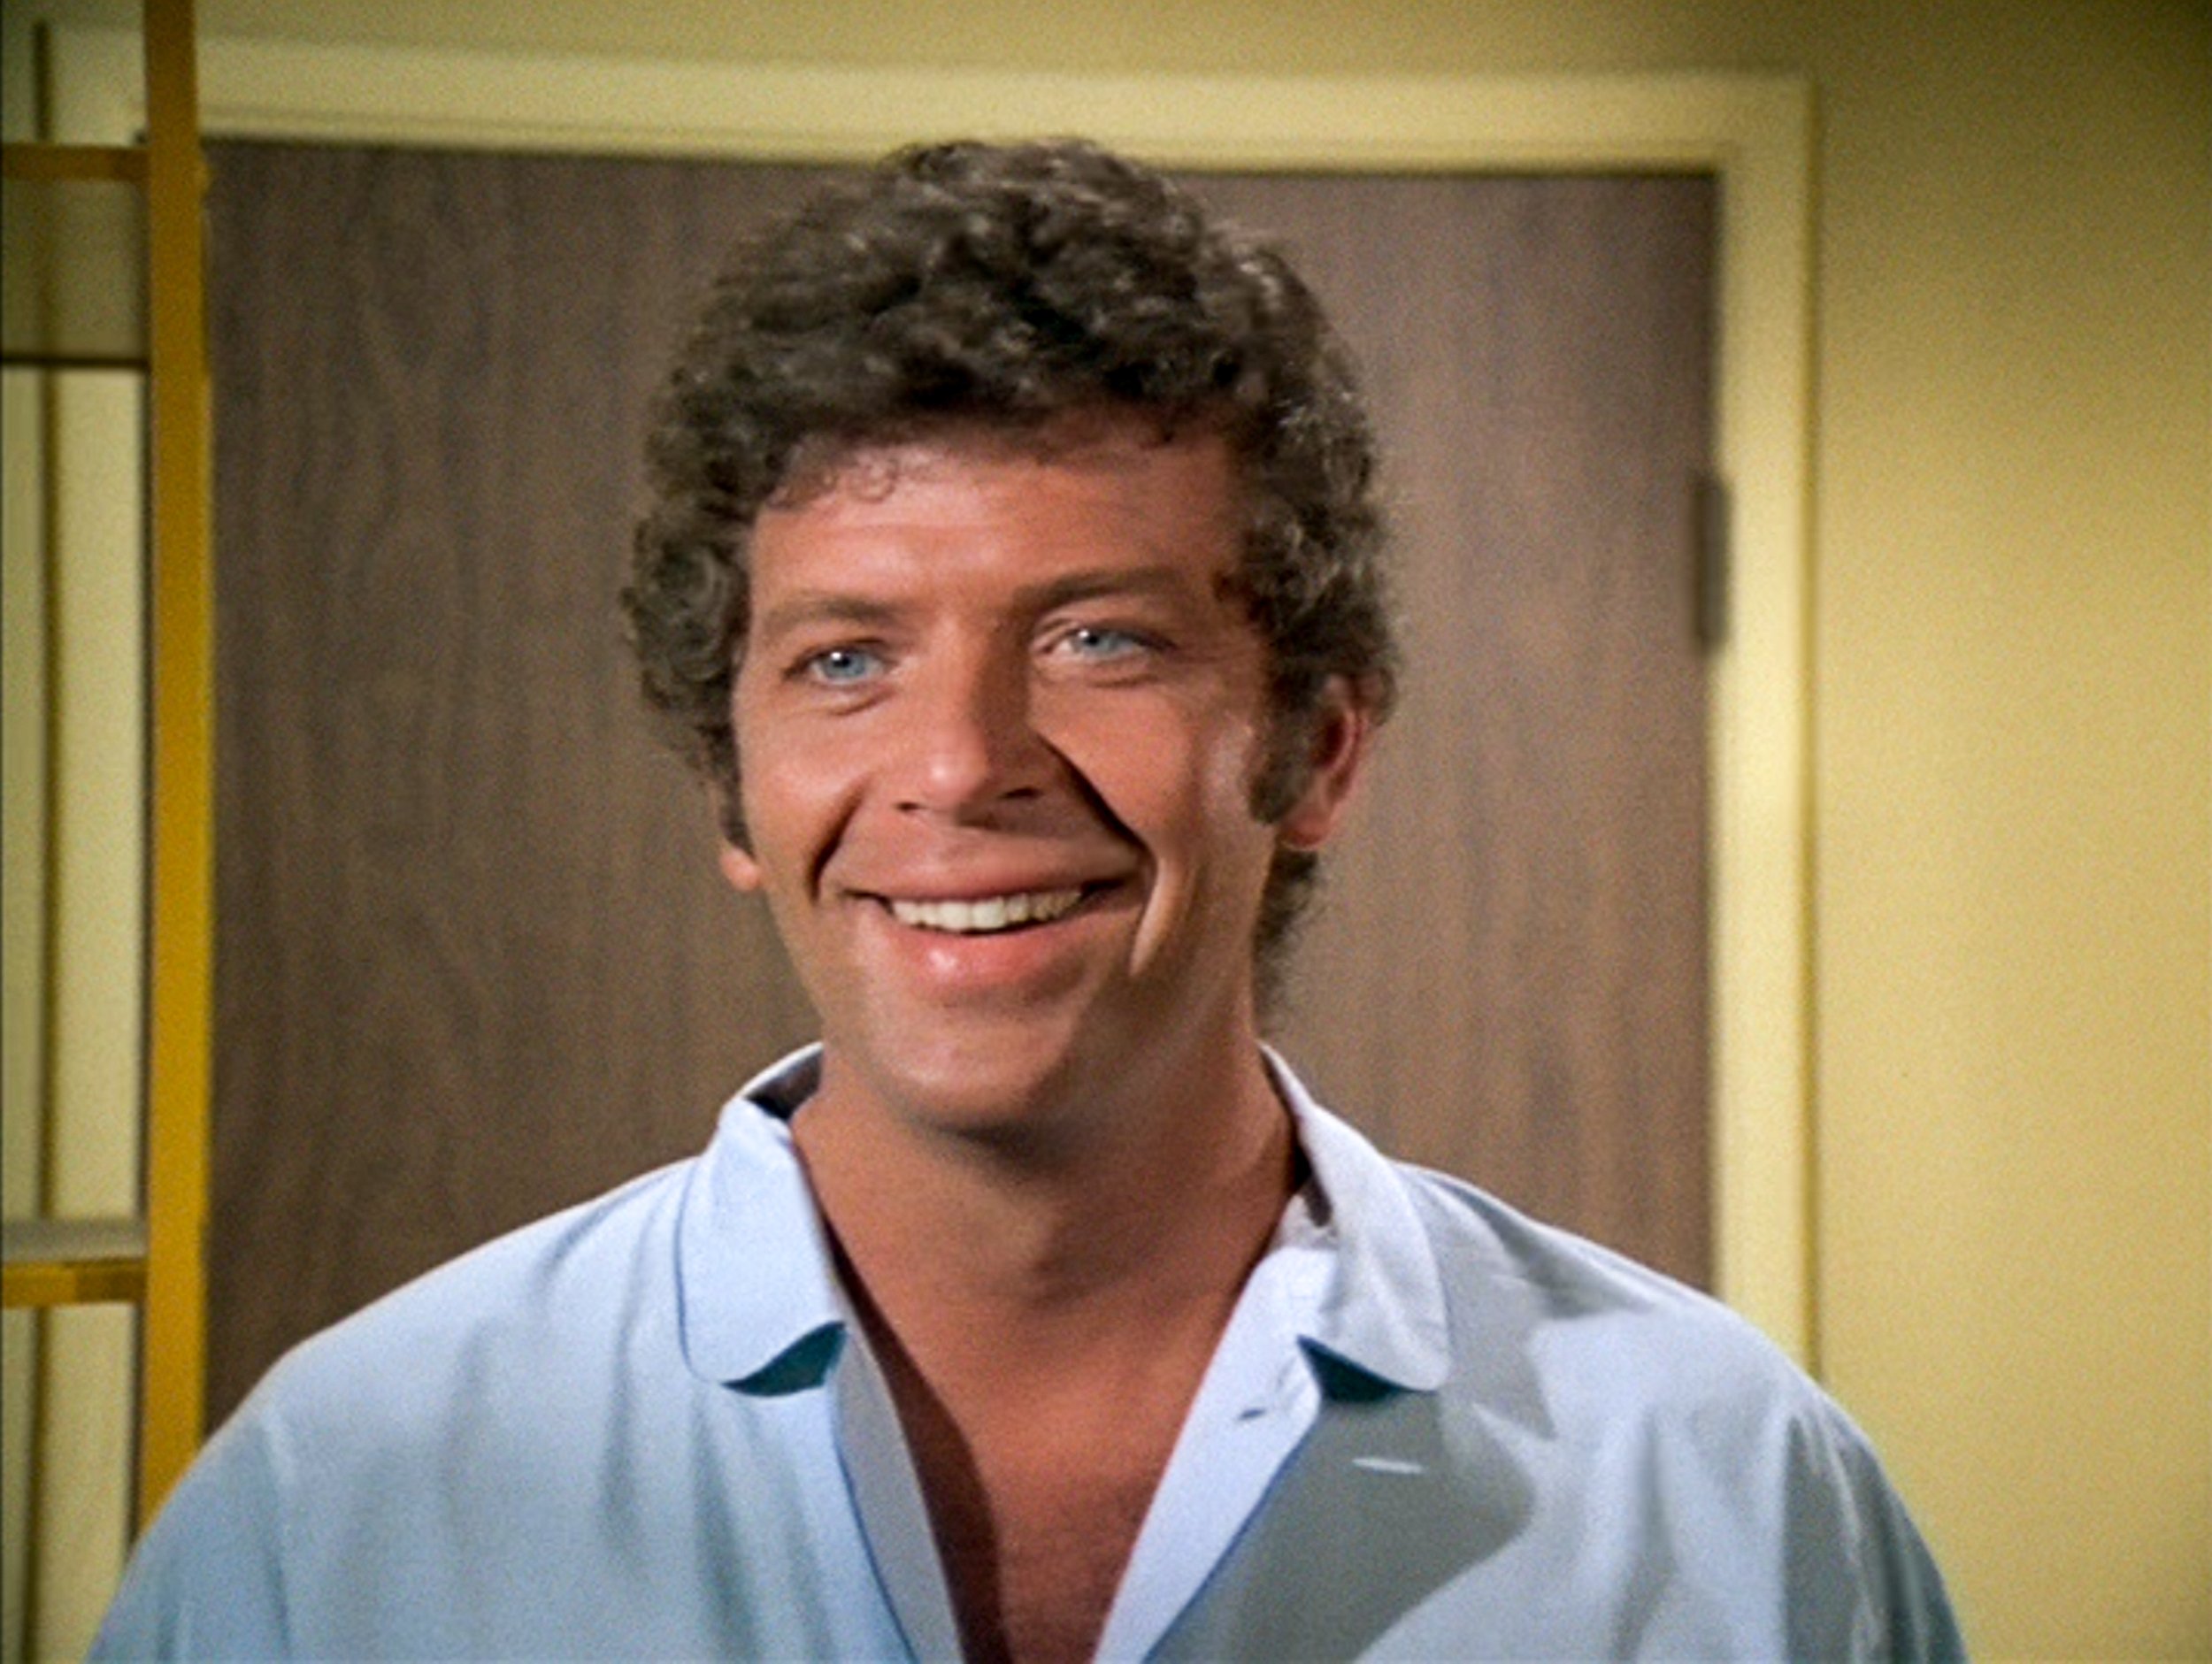 Robert Reed as Mike Brady in THE BRADY BUNCH episode, "Pass The Tabu" which aired on September 29, 1972 | Source: Getty Images